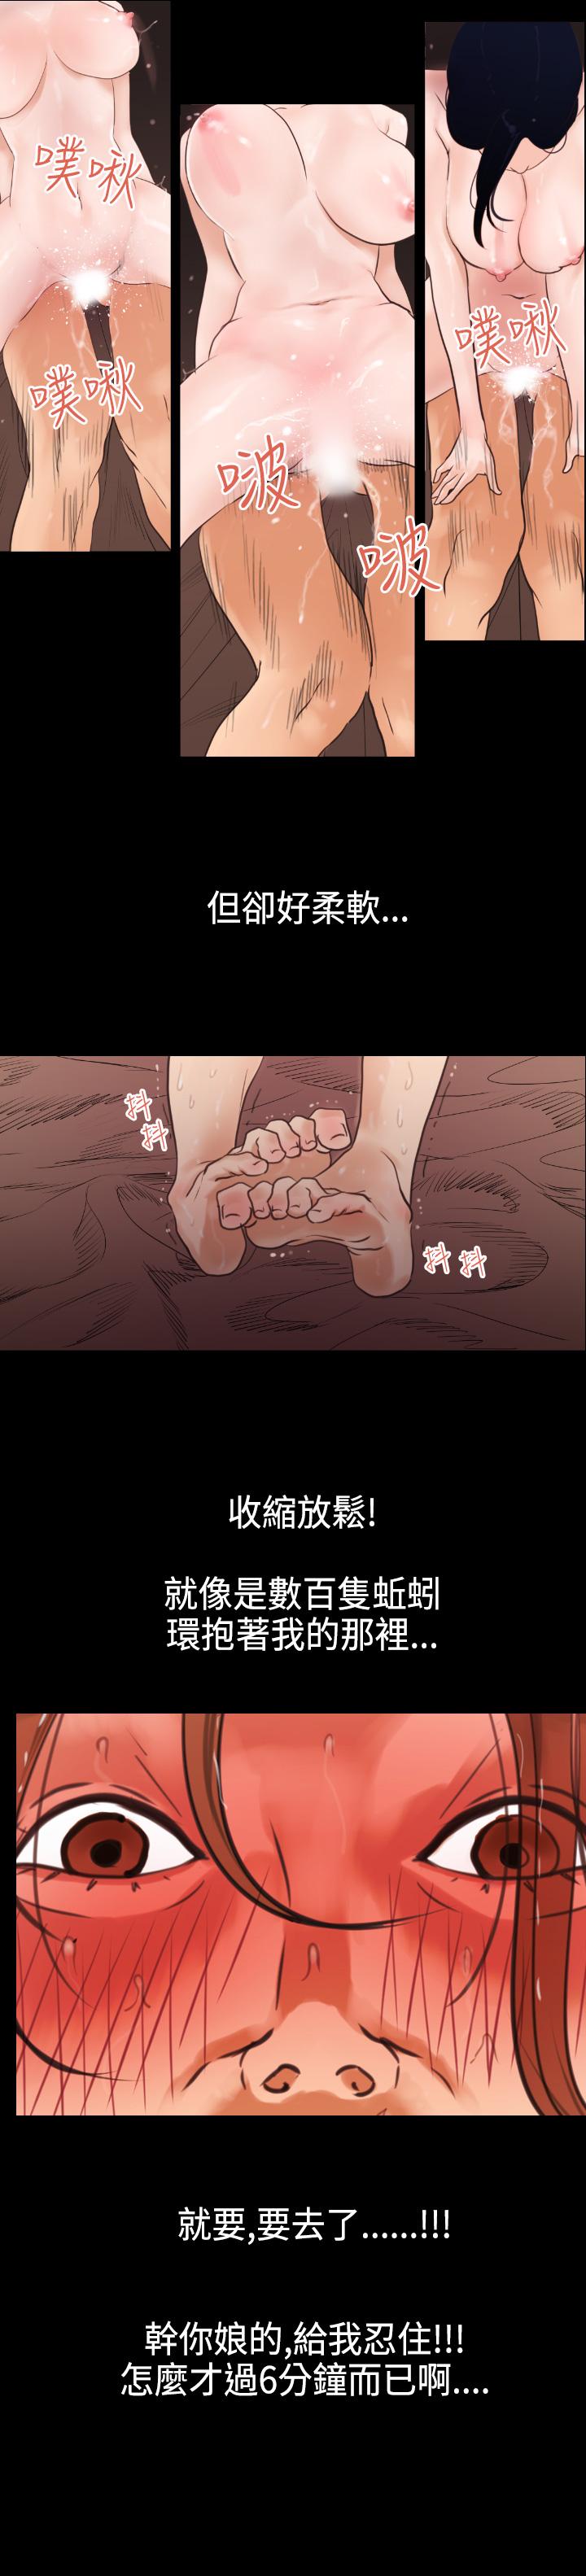 Desire King (慾求王) Ch.1-12 (chinese) 6